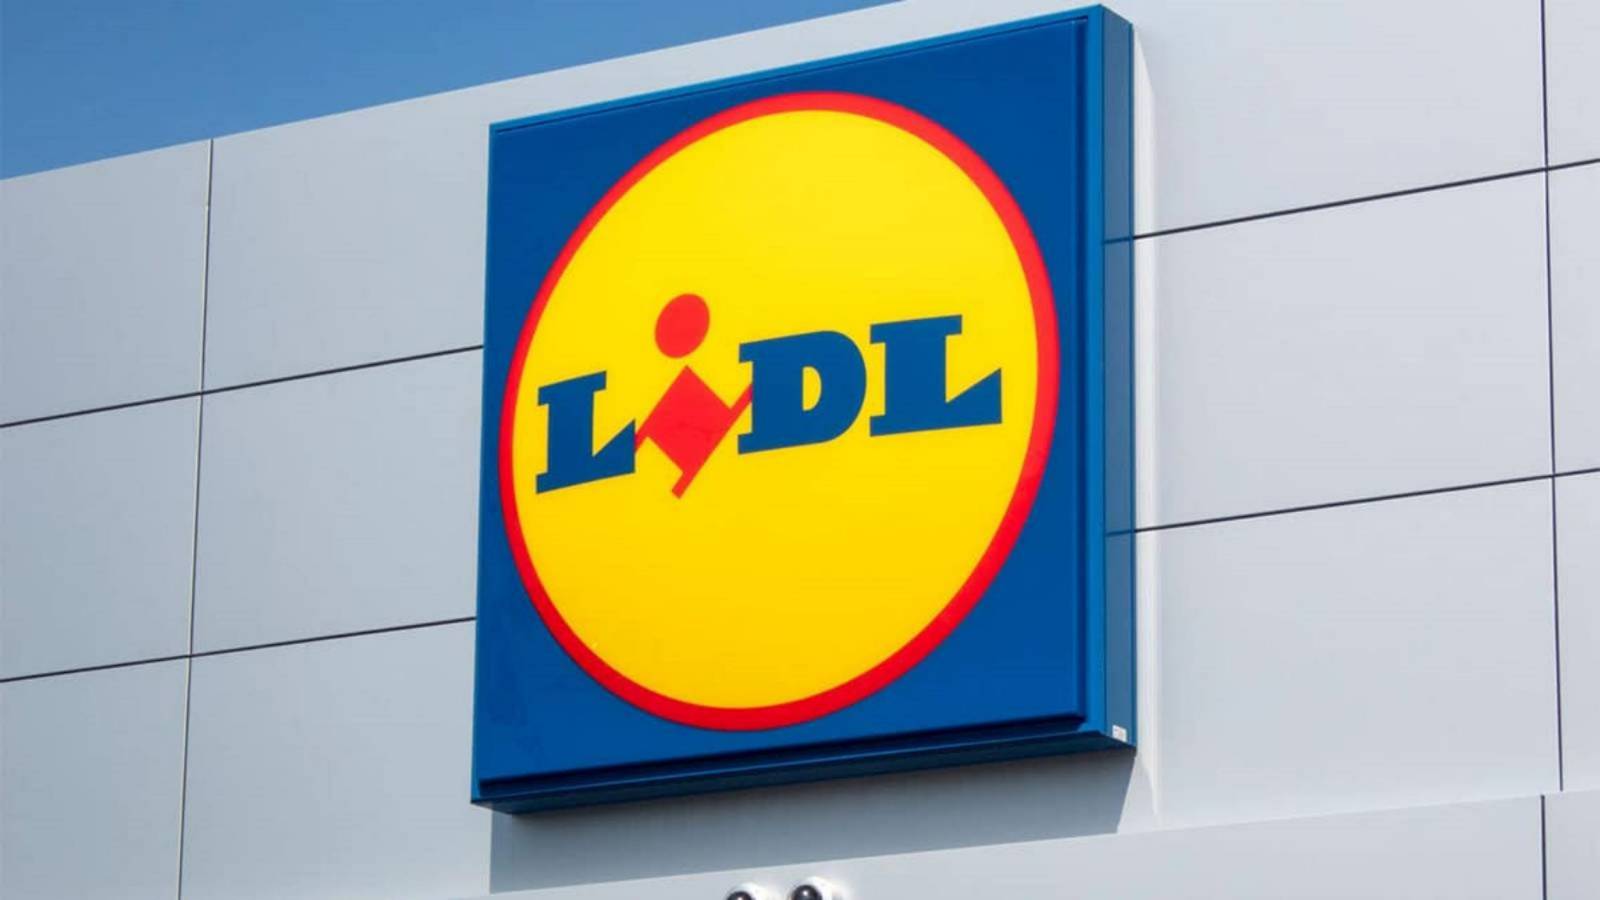 LIDL Romania washed